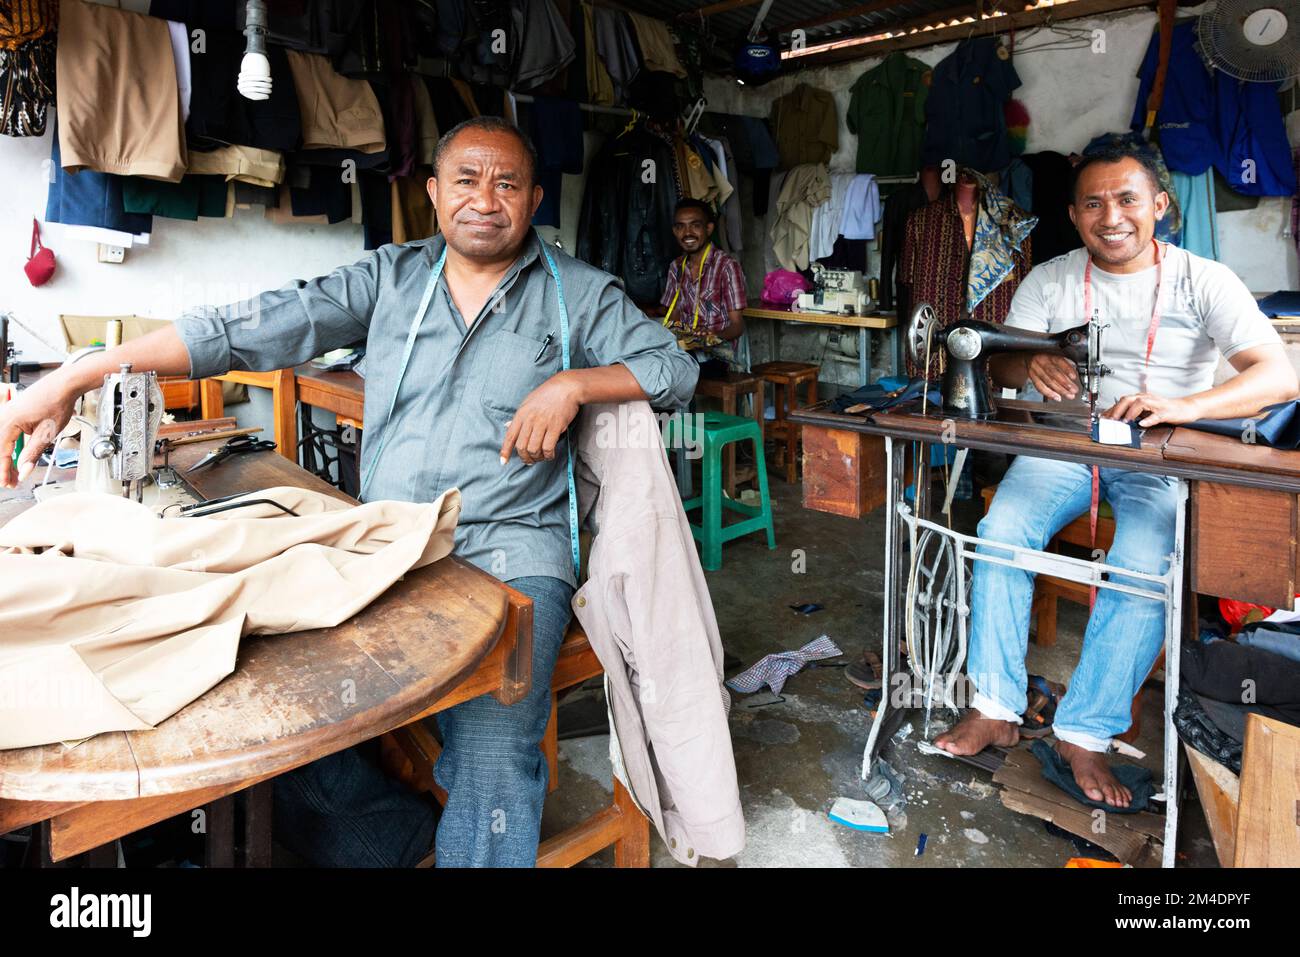 A tailor and his staff at work in their small business. Stock Photo